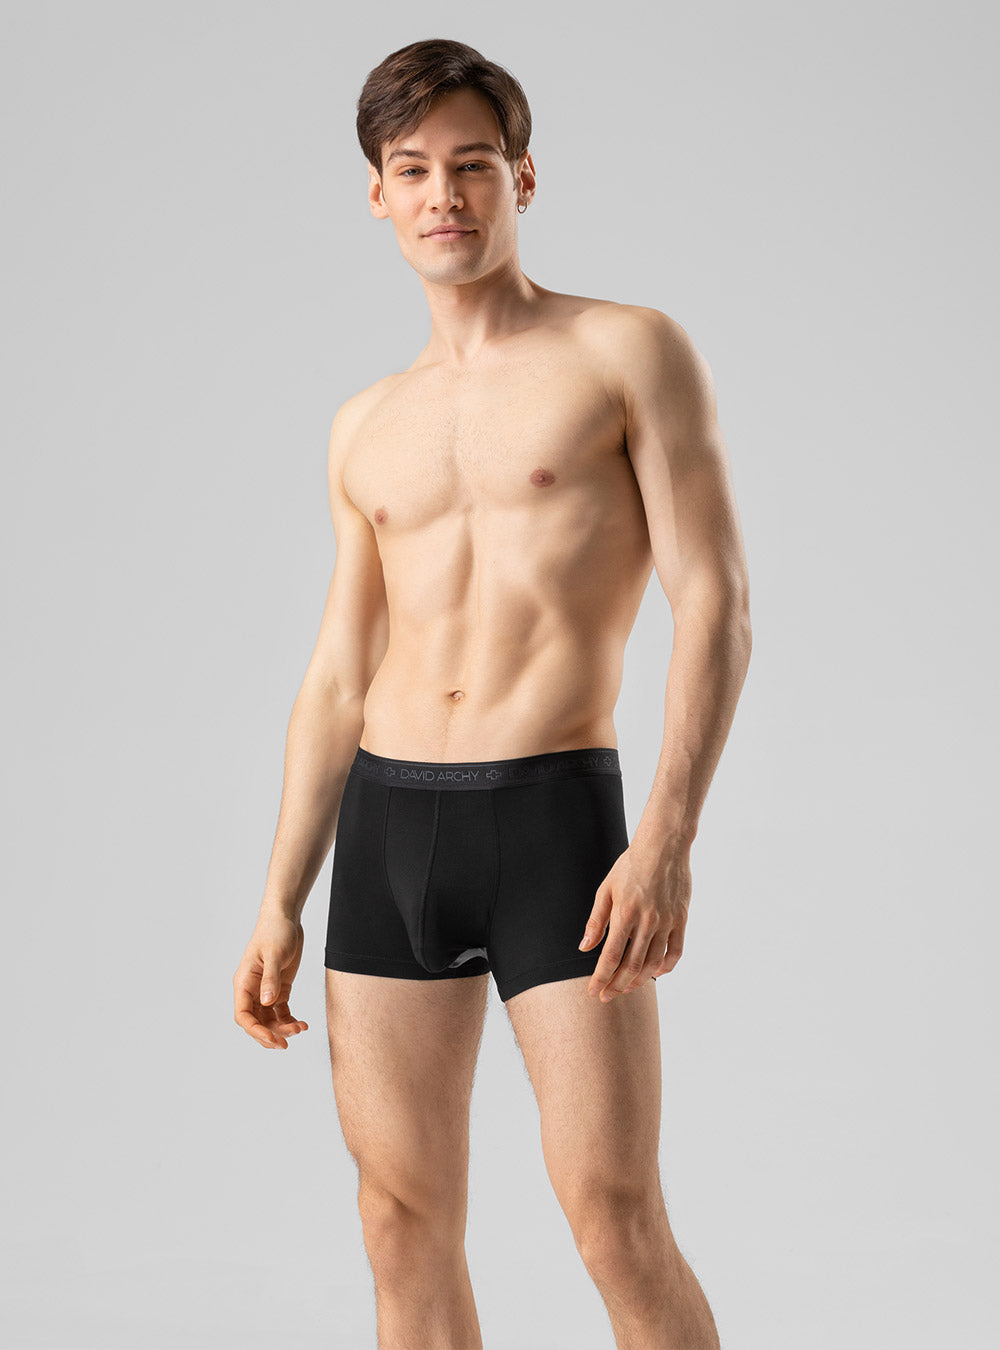 Arius Filled Front Briefs for Increased Volume and Size of Male Attributes  and a Round Shape in Grey - Push-Up and Filling - Made in Europe